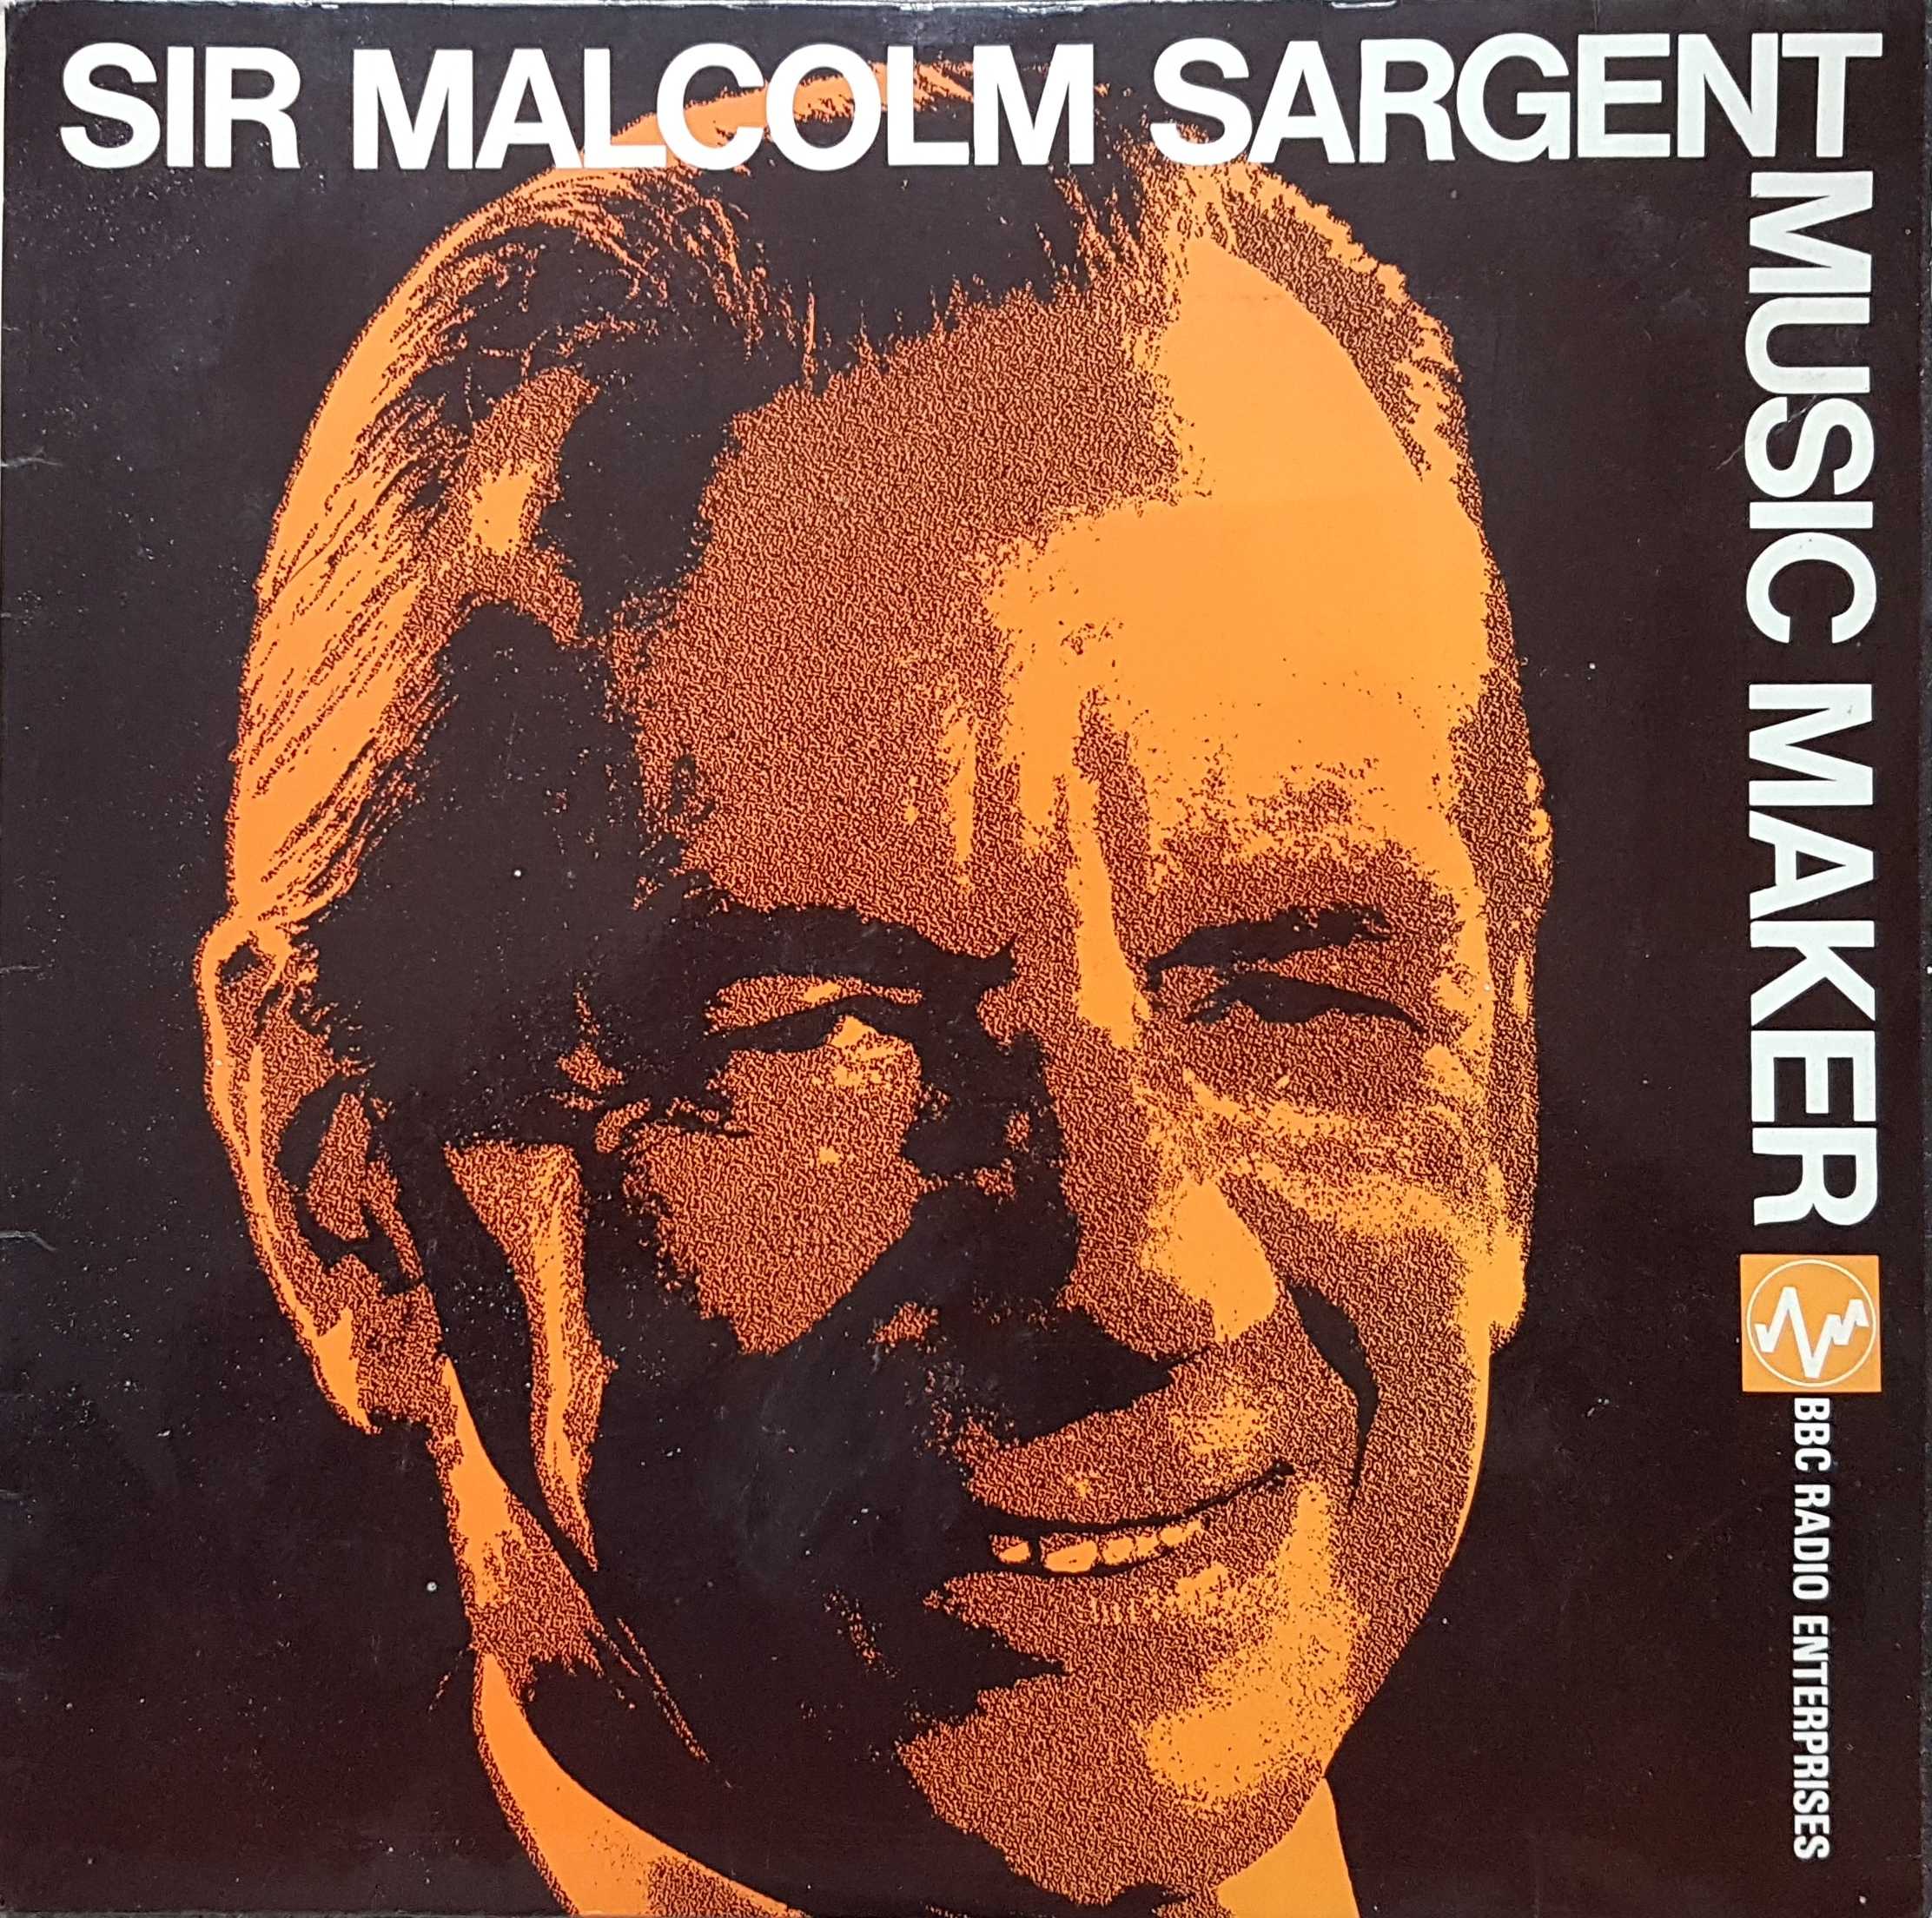 Picture of RE 11 Sir Malcolm Sargent - Music maker by artist Sir Malcolm Sargent from the BBC albums - Records and Tapes library